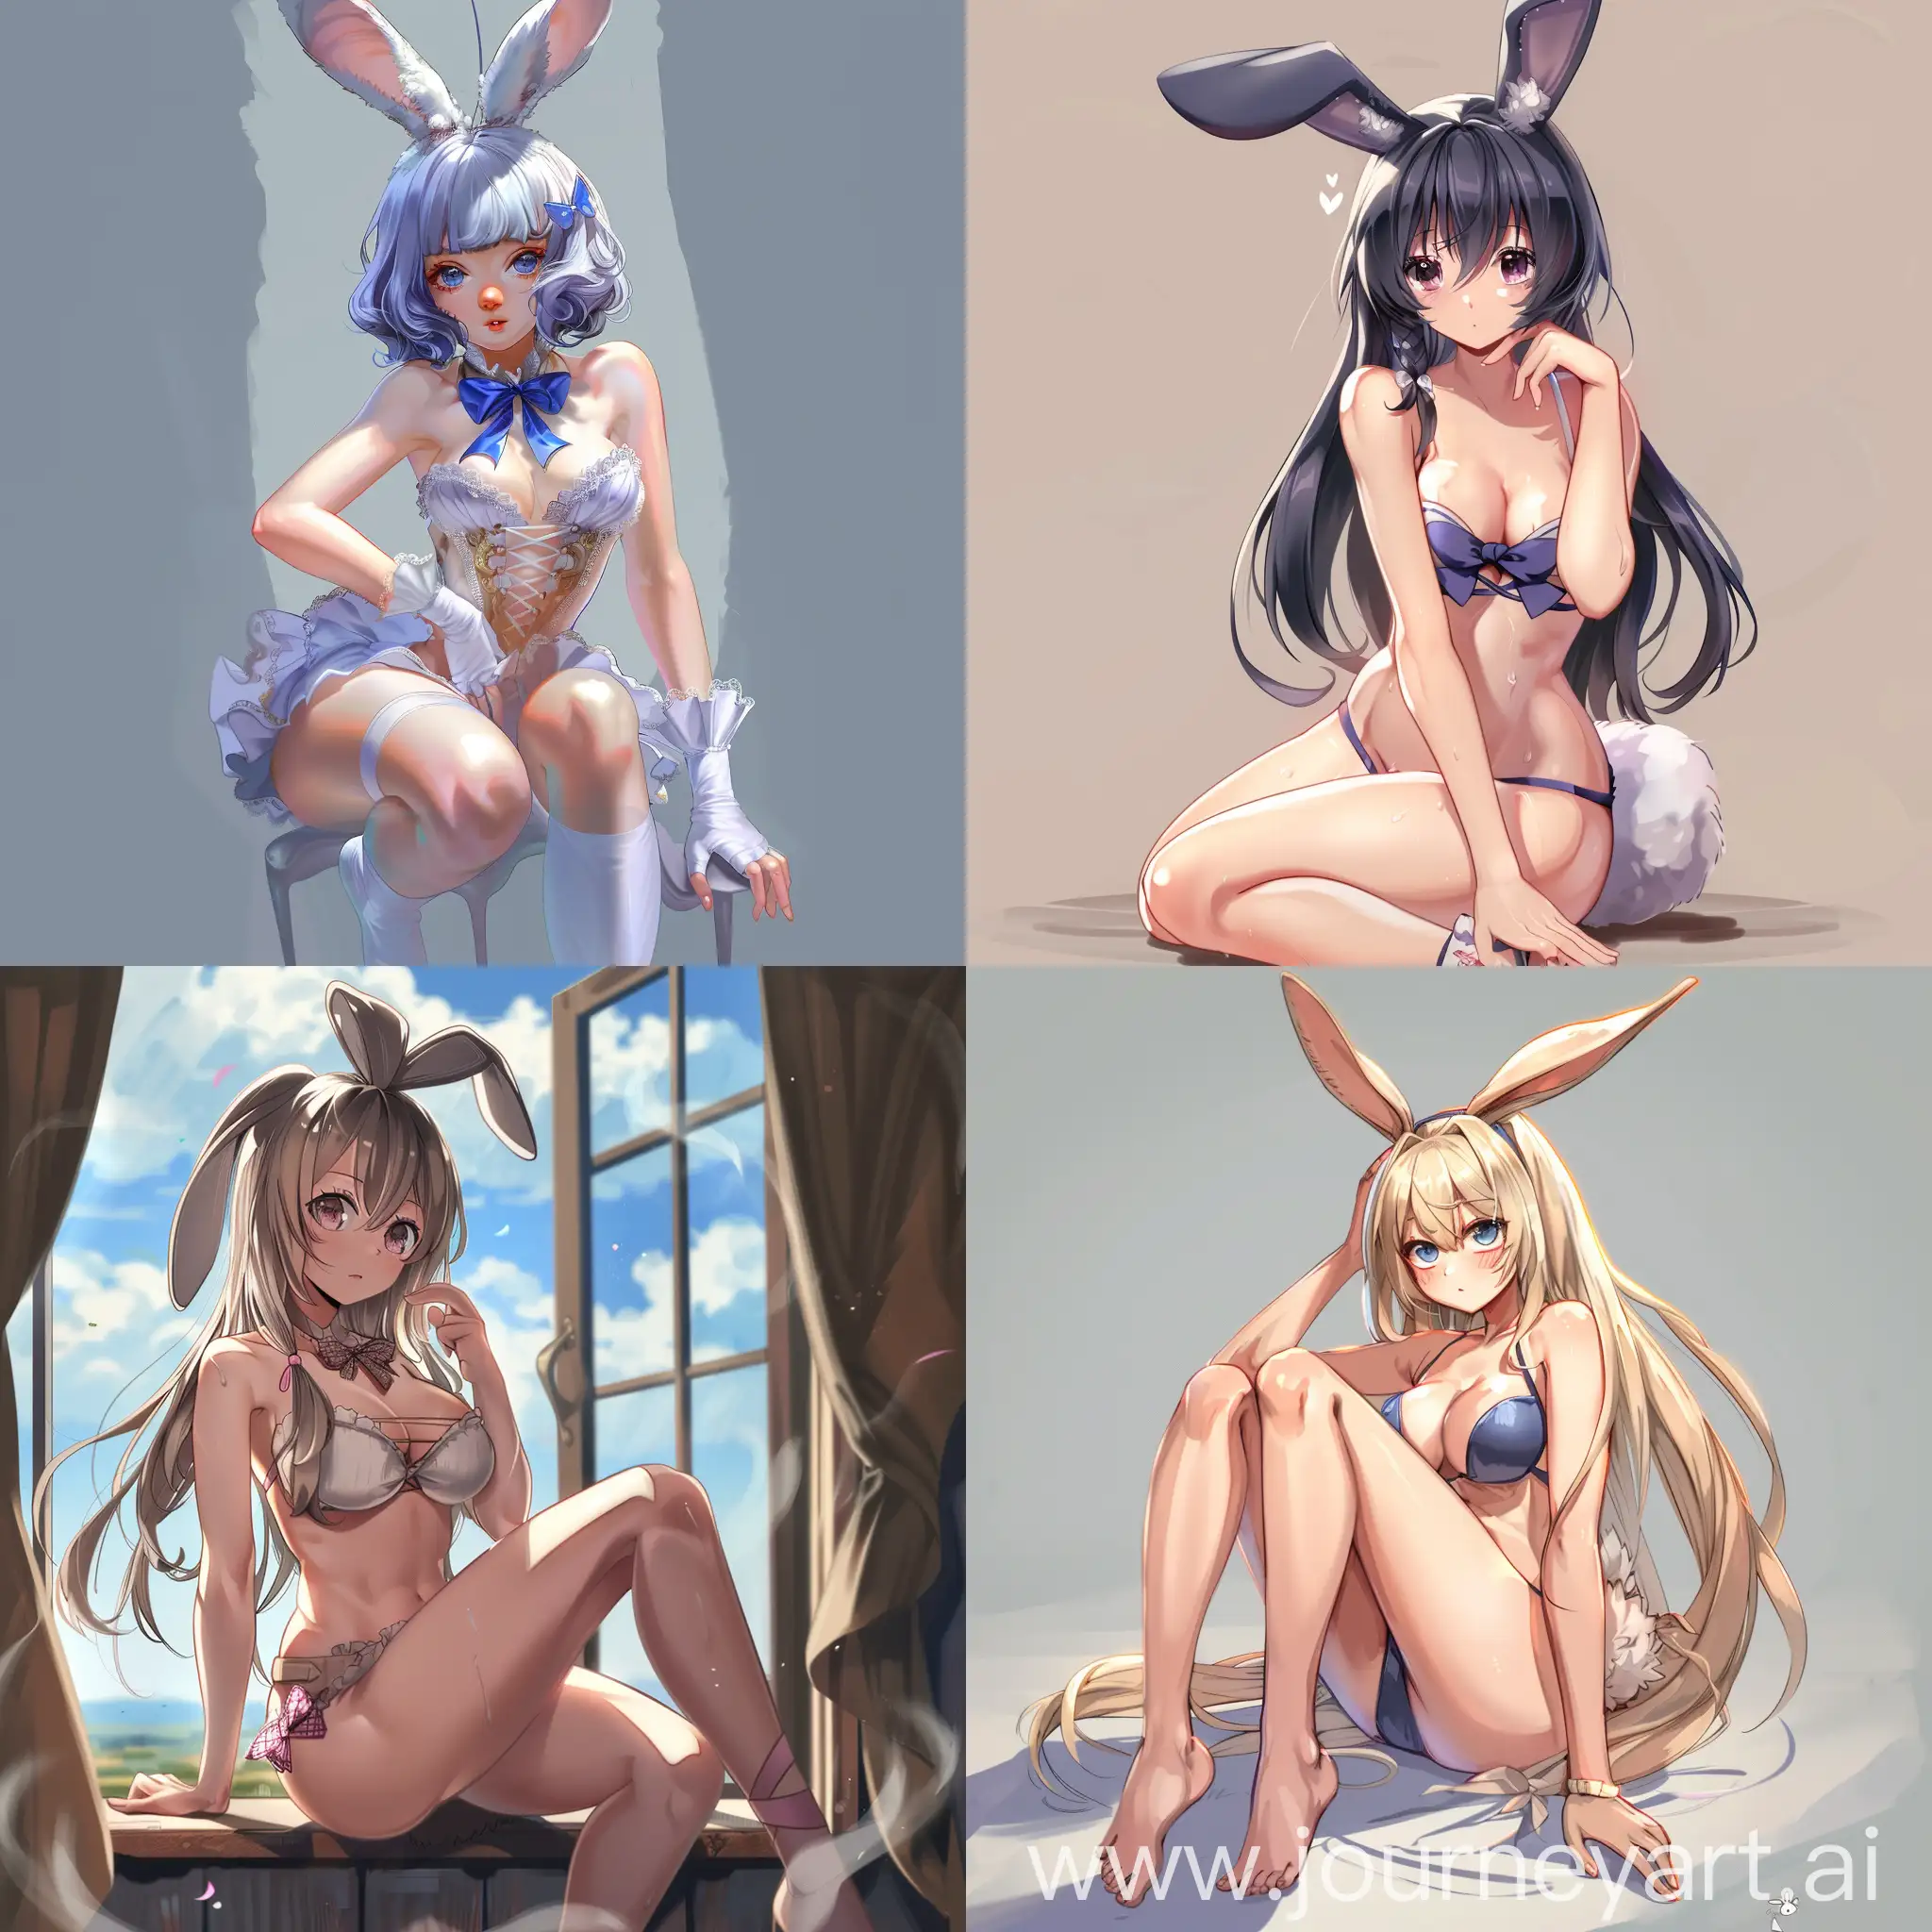 Adorable-Bunny-Girl-in-HighQuality-Illustration